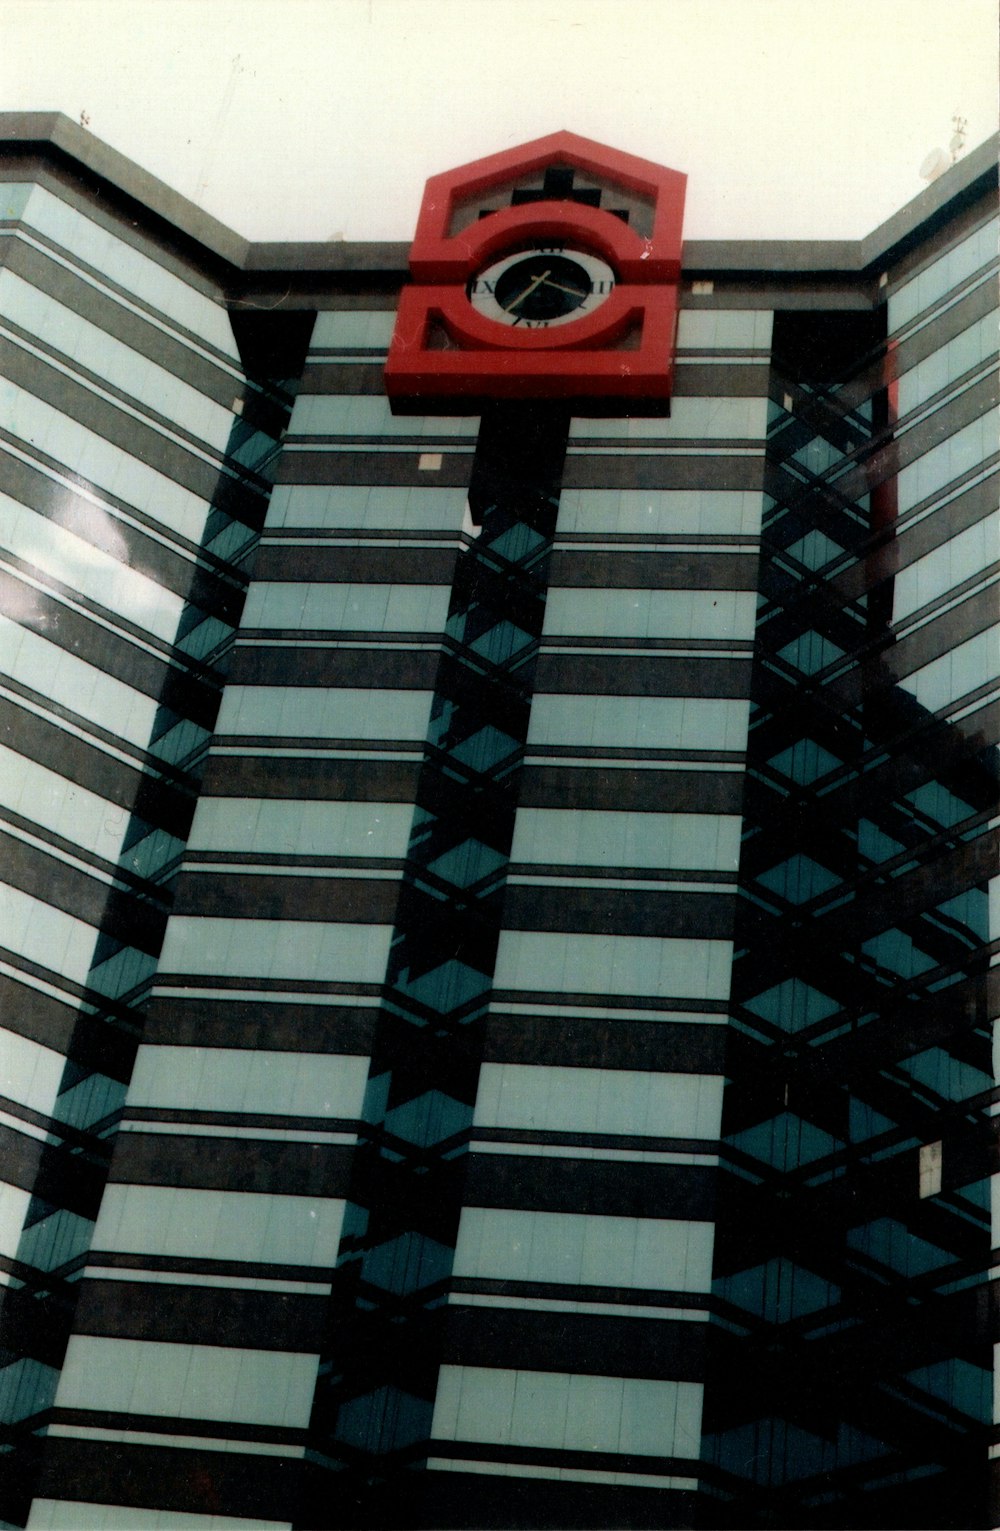 a red clock on the side of a tall building